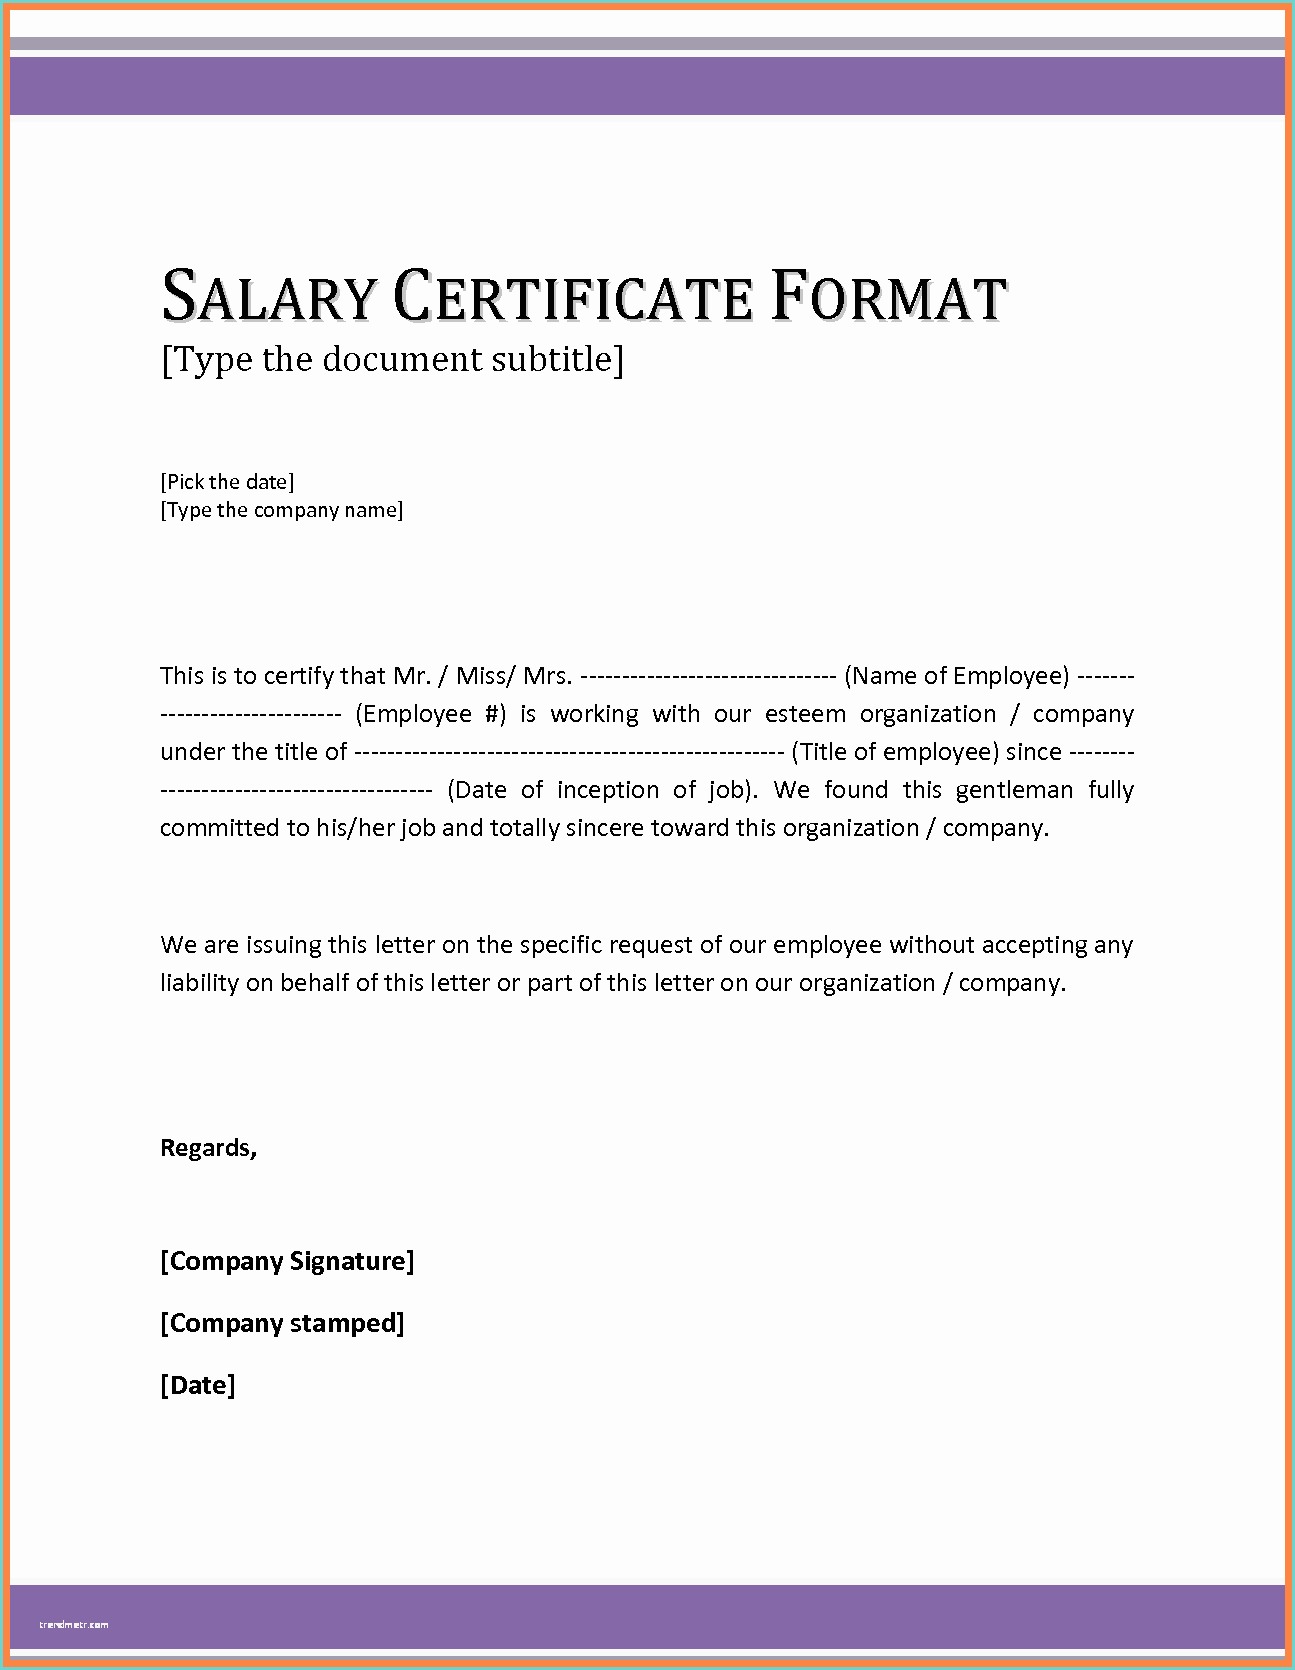 How to Write Certificate 6 Salary Proof Letter Template